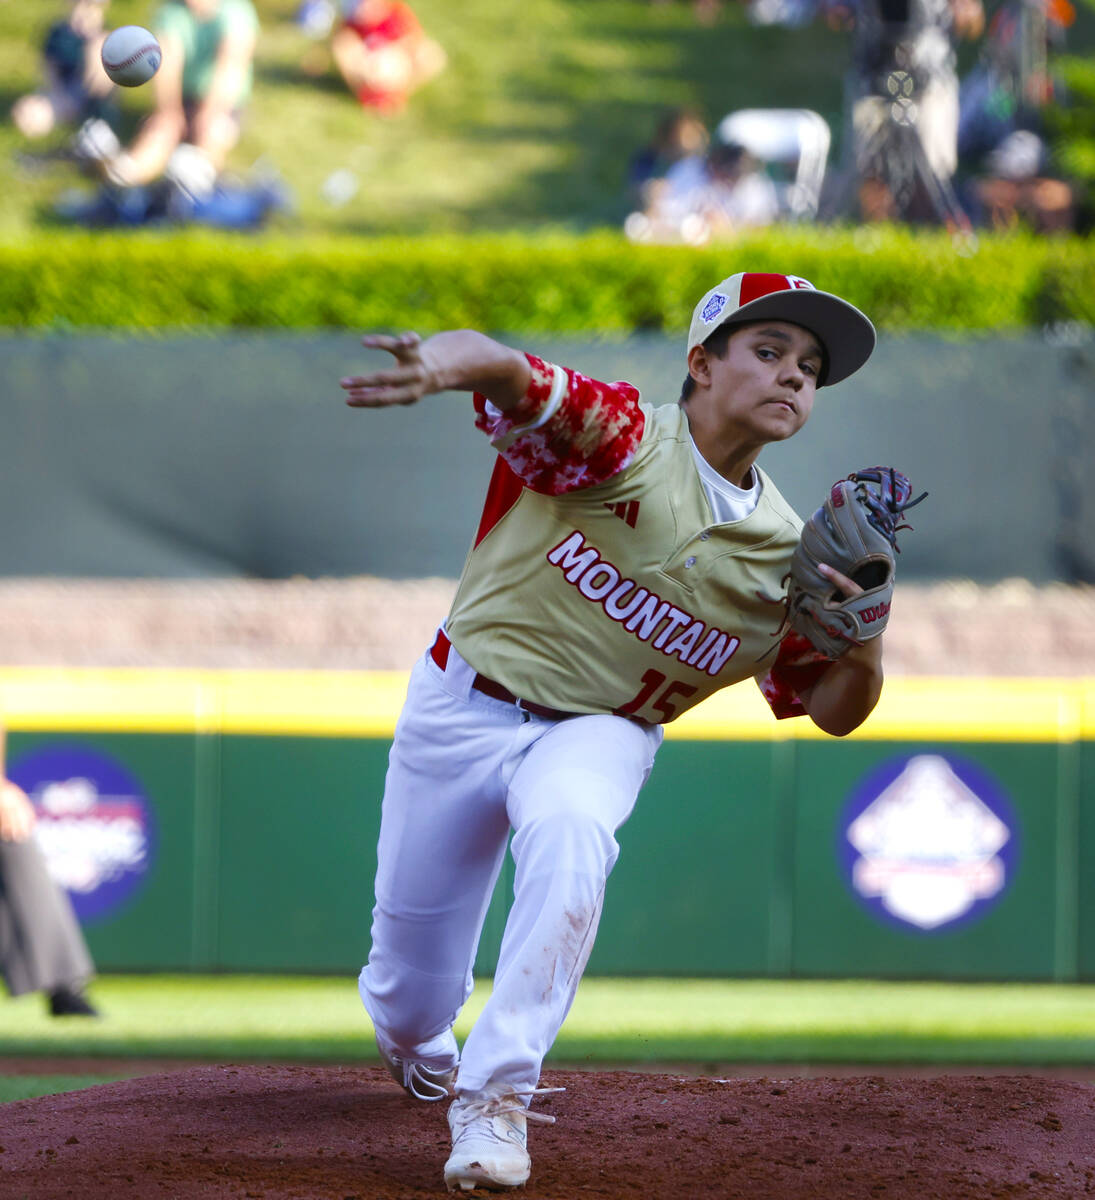 The Henderson All-Stars pitcher David Edwards delivers a pitch against New Albany, Ohio, during ...